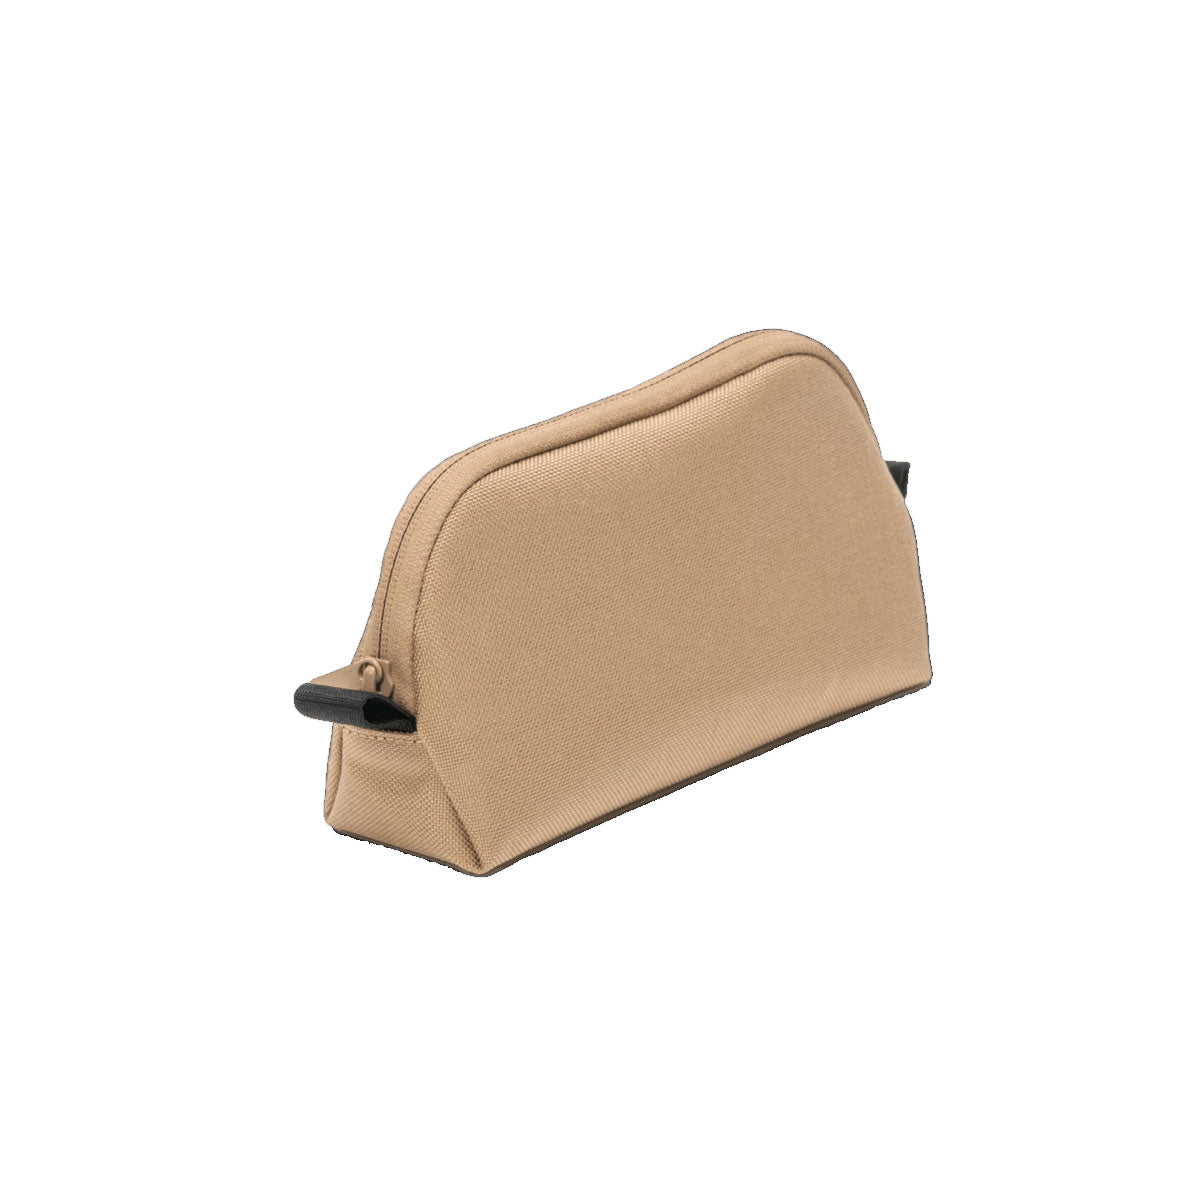 Able Carry : The Daily Stash Pouch : Cordura Sand